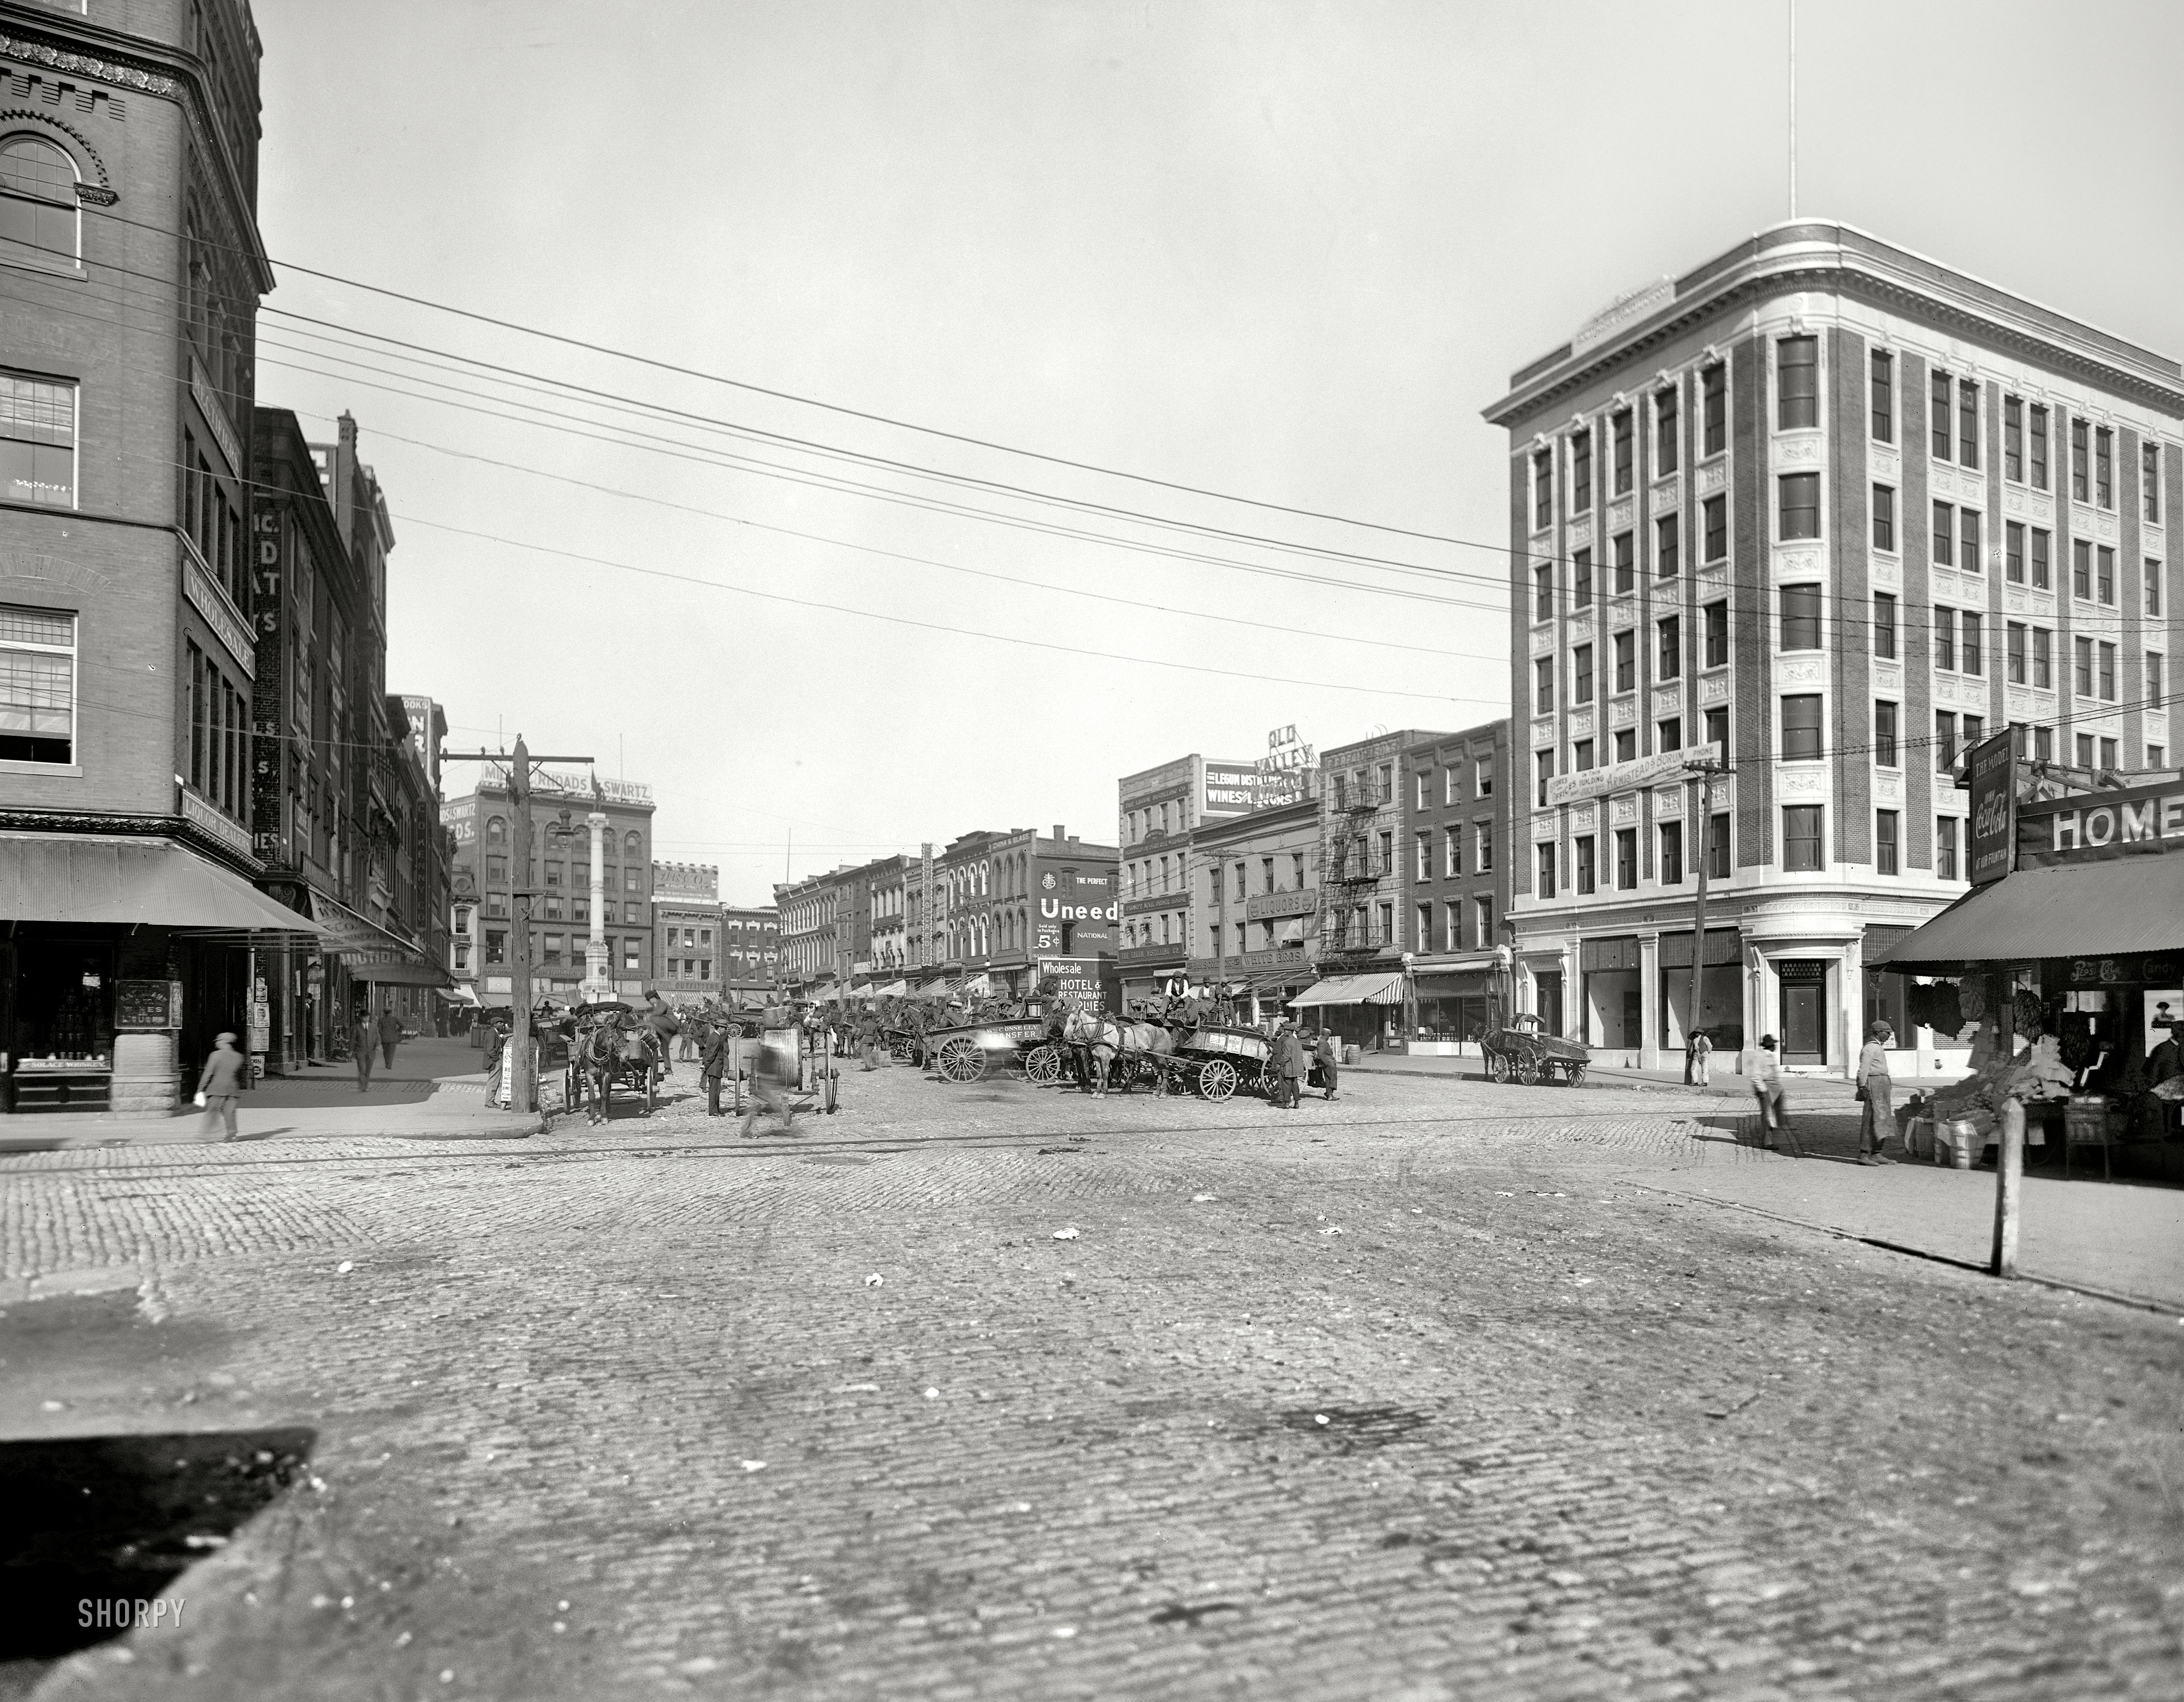 Norfolk, Virginia, circa 1910. "Commercial Place." A different perspective on the Civil War monument and Coca-Cola sign seen in the previous post. 8x10 inch dry plate glass negative, Detroit Publishing Company. View full size.